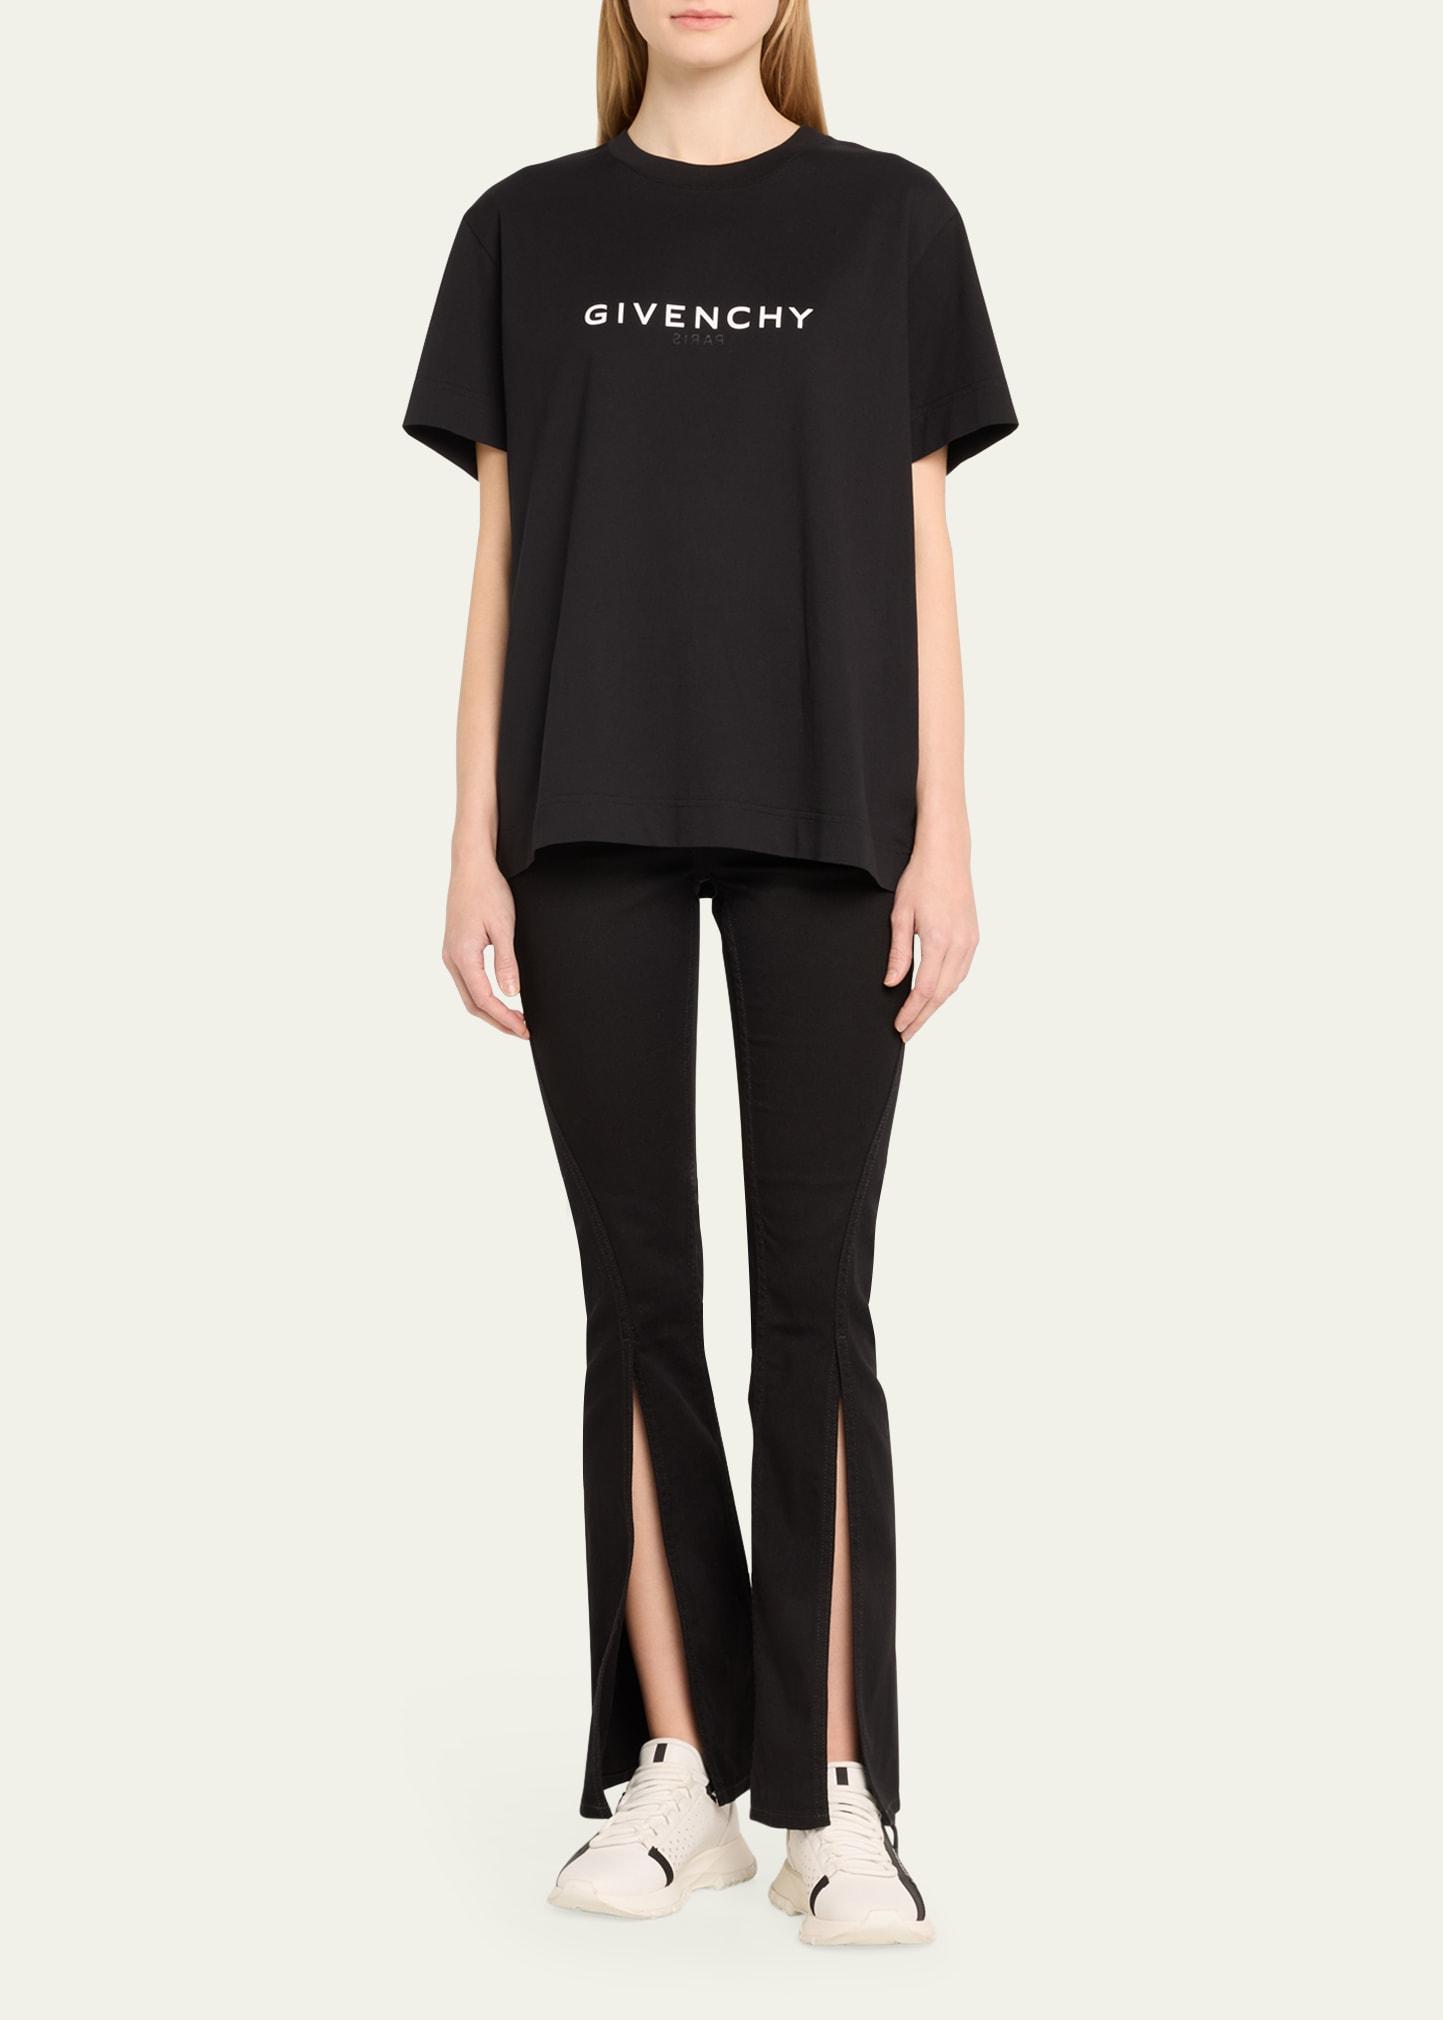 Givenchy Classic Fit Logo T-shirt in Black | Lyst